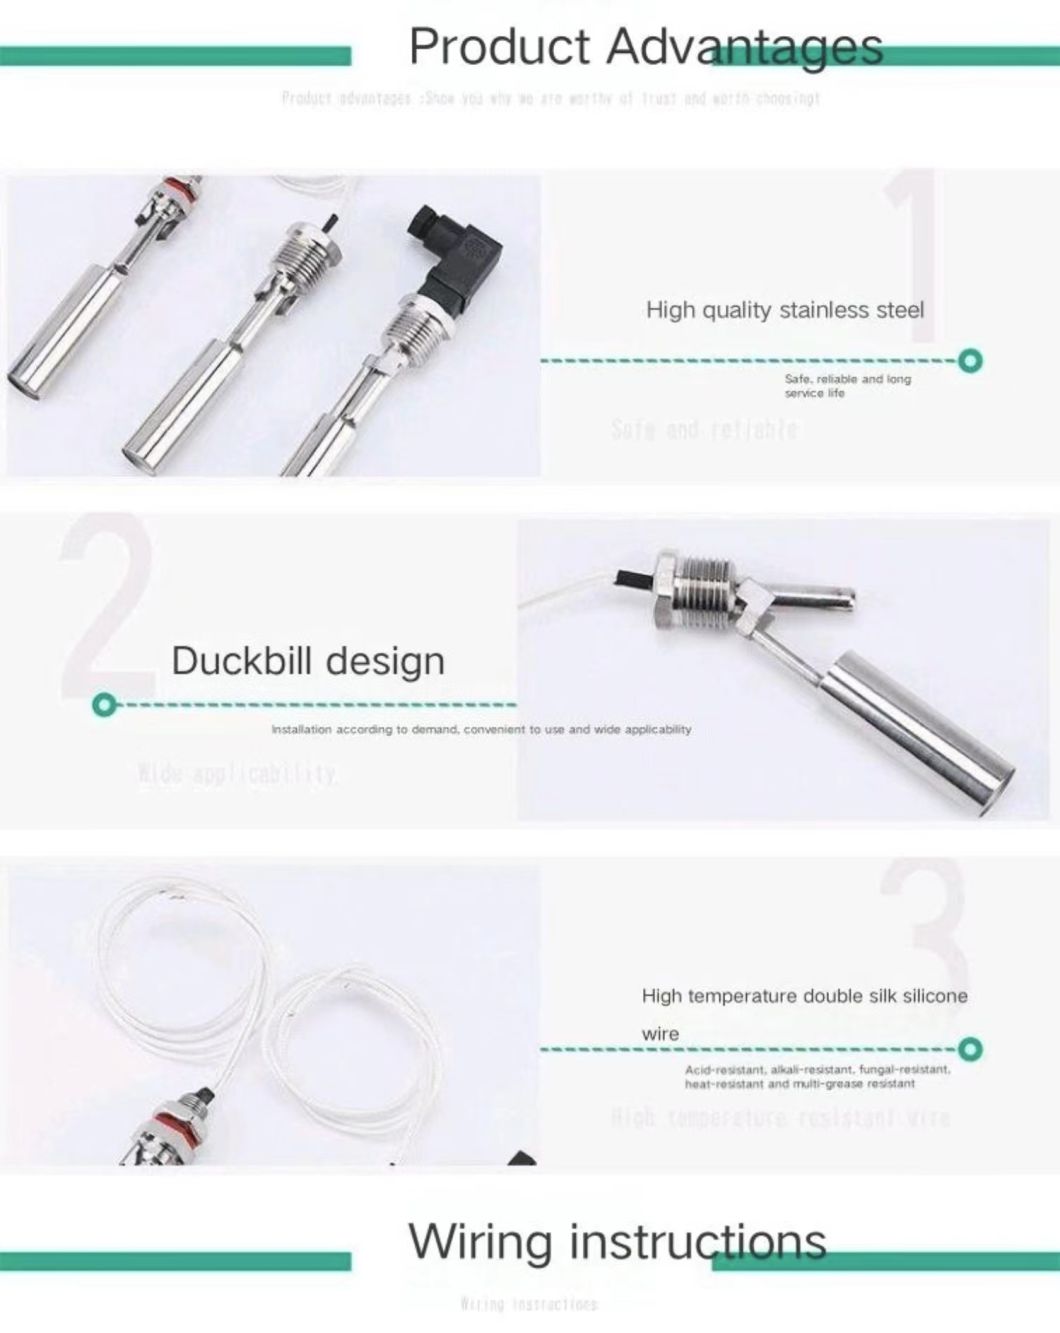 Stainless Steel Duckbill Float Switch, Duckbill Type Liquid Level Switch, Side Mounted Float Water Level Controller, Compact 220V